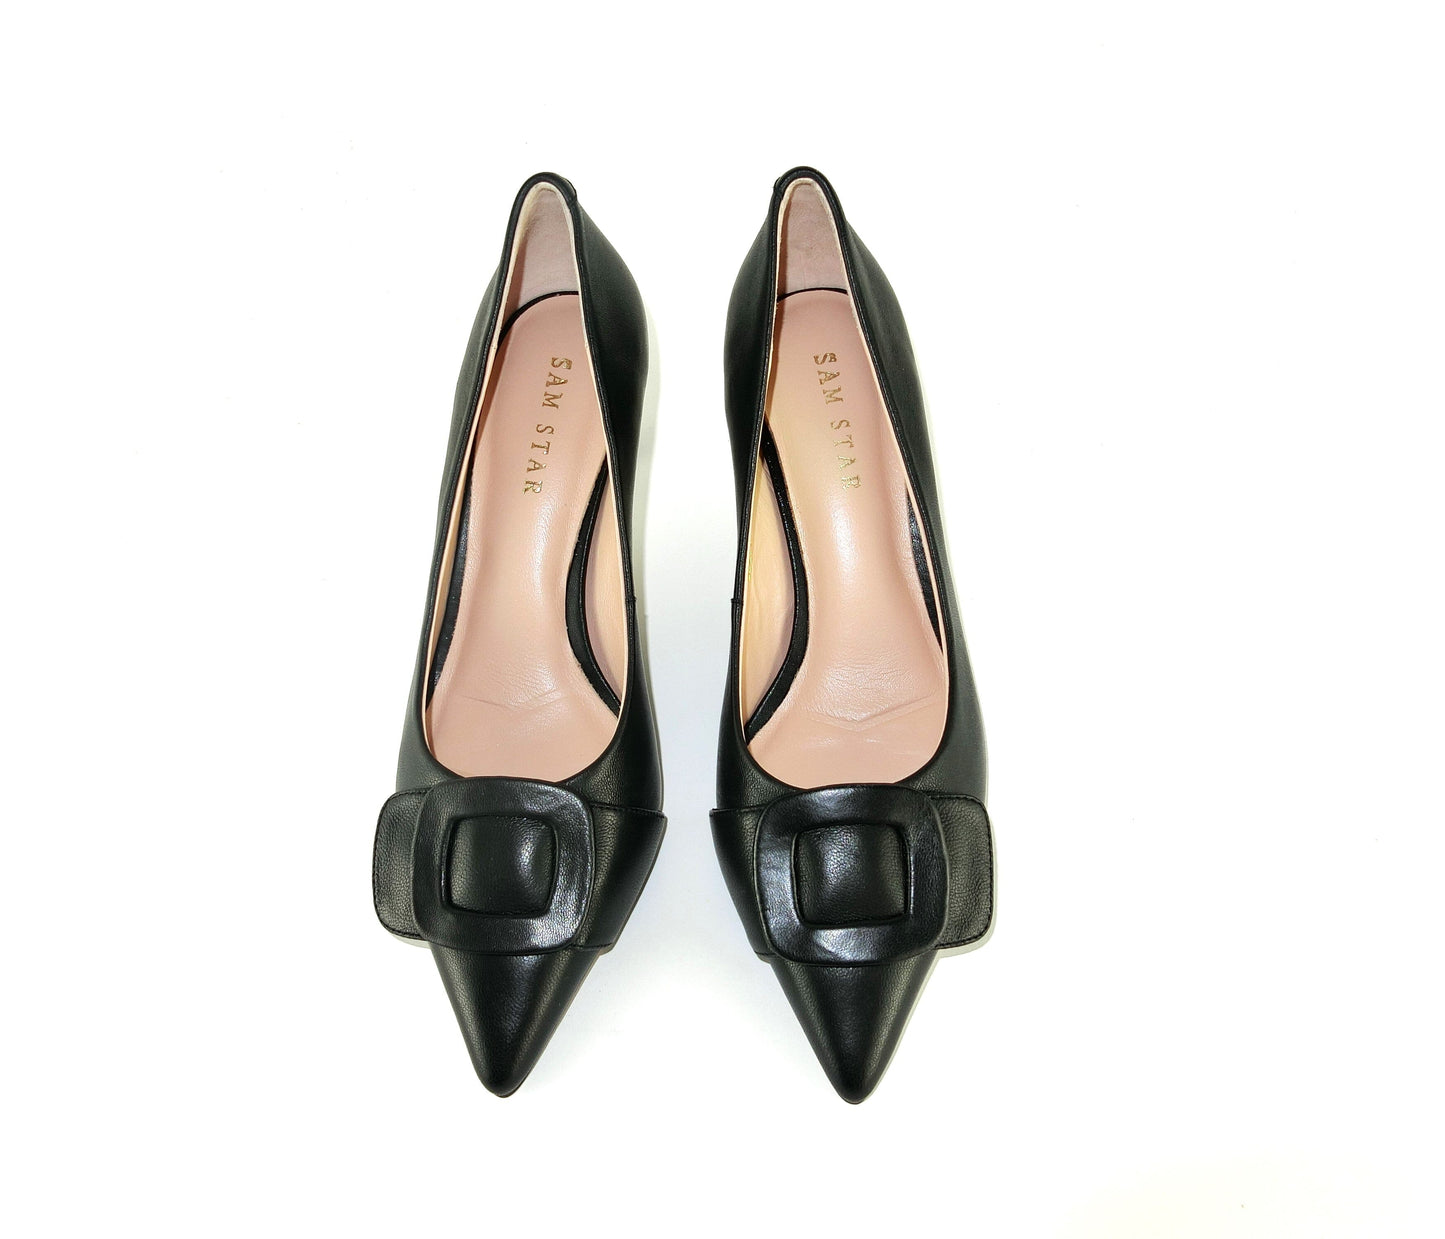 Pre order - SS23005 Leather court shoes with buckle - Black ladies shoes Sam Star shoes Black 37/4 